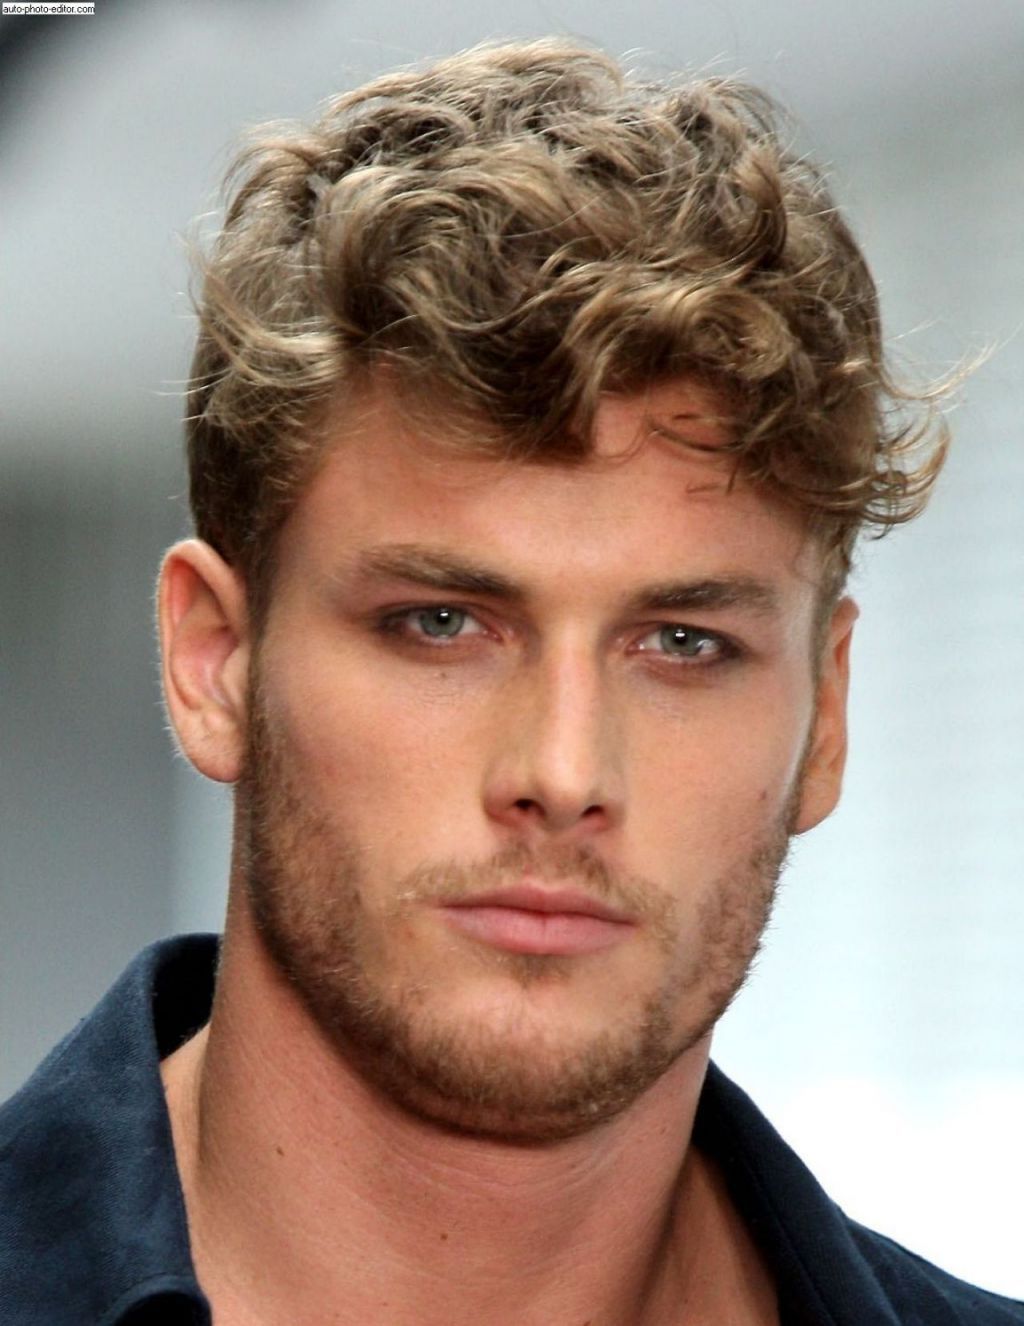 ? 24+ Inspirational Short Curly Hairstyles Men: Medium Wavy In Curly Short Hairstyles For Guys (View 21 of 25)